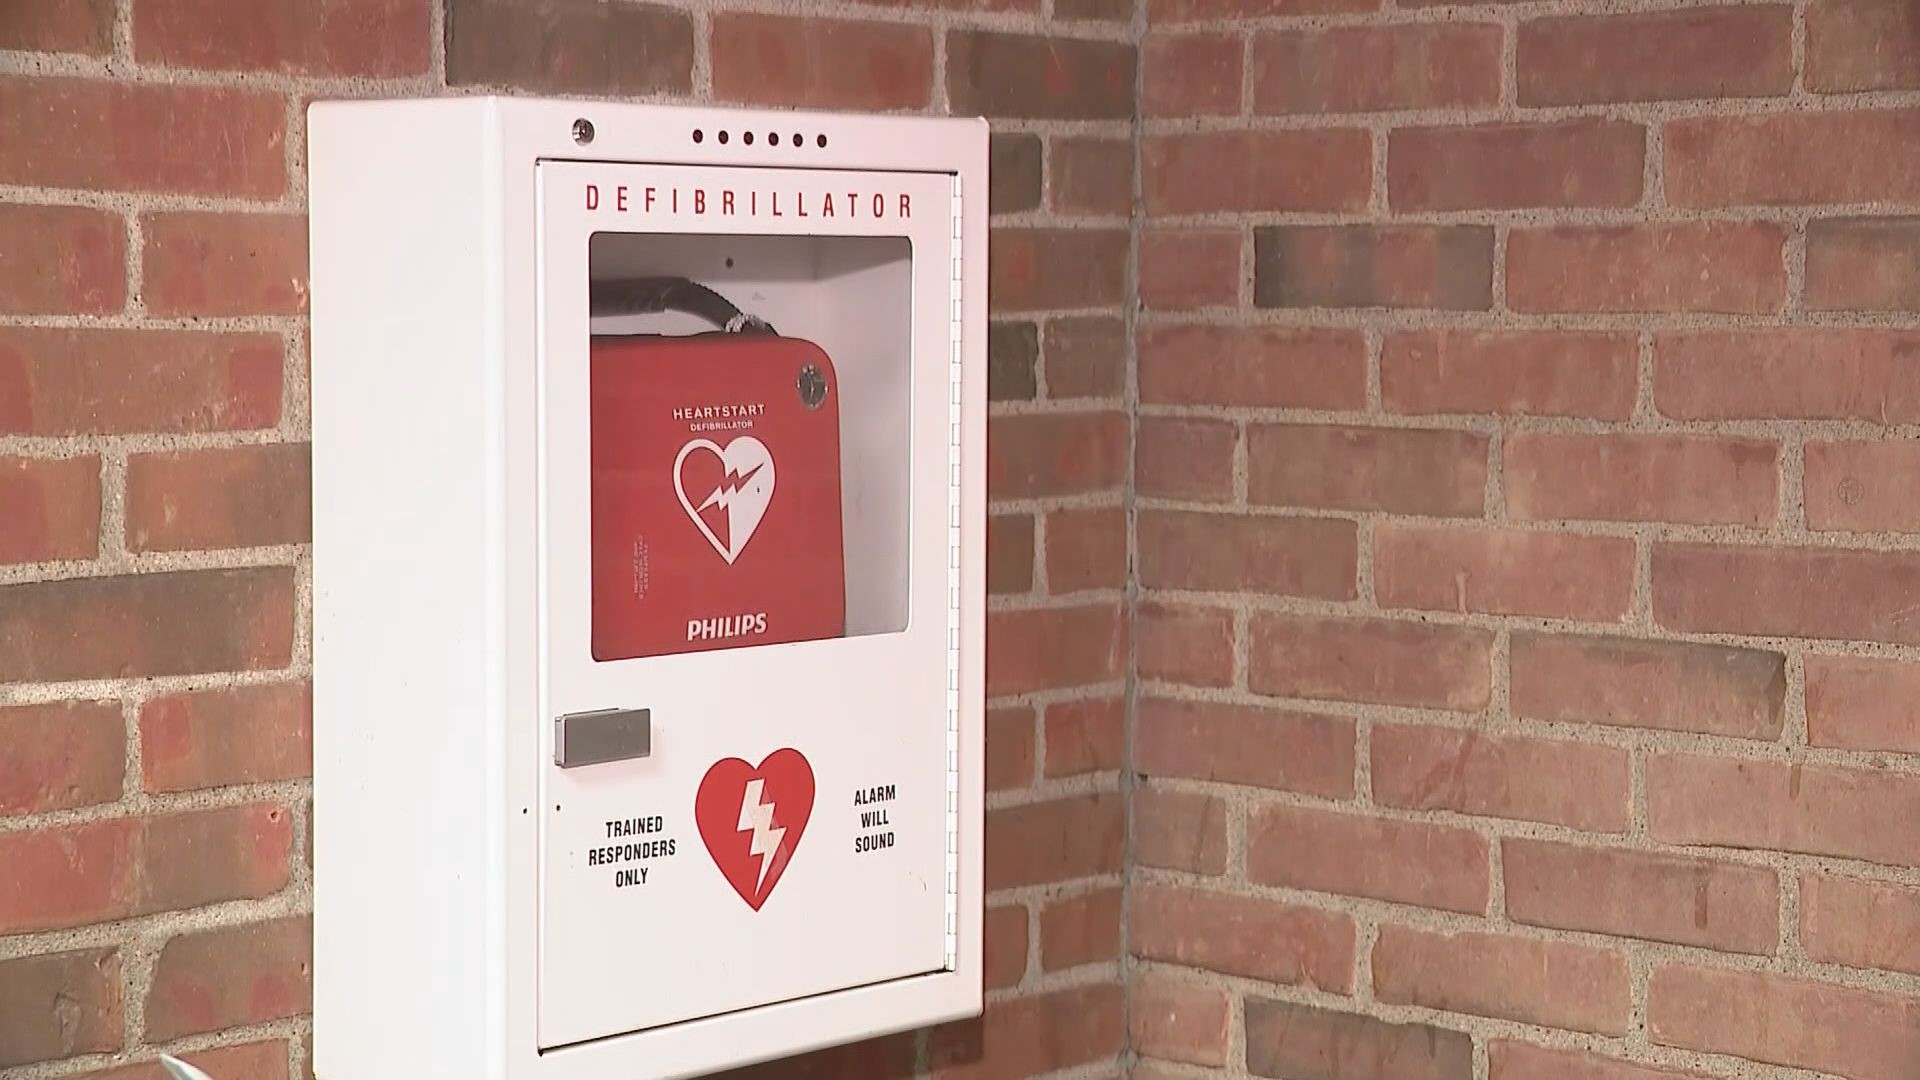 Testimony was heard Tuesday in support of a bill to require AEDs in schools and recreation facilities.